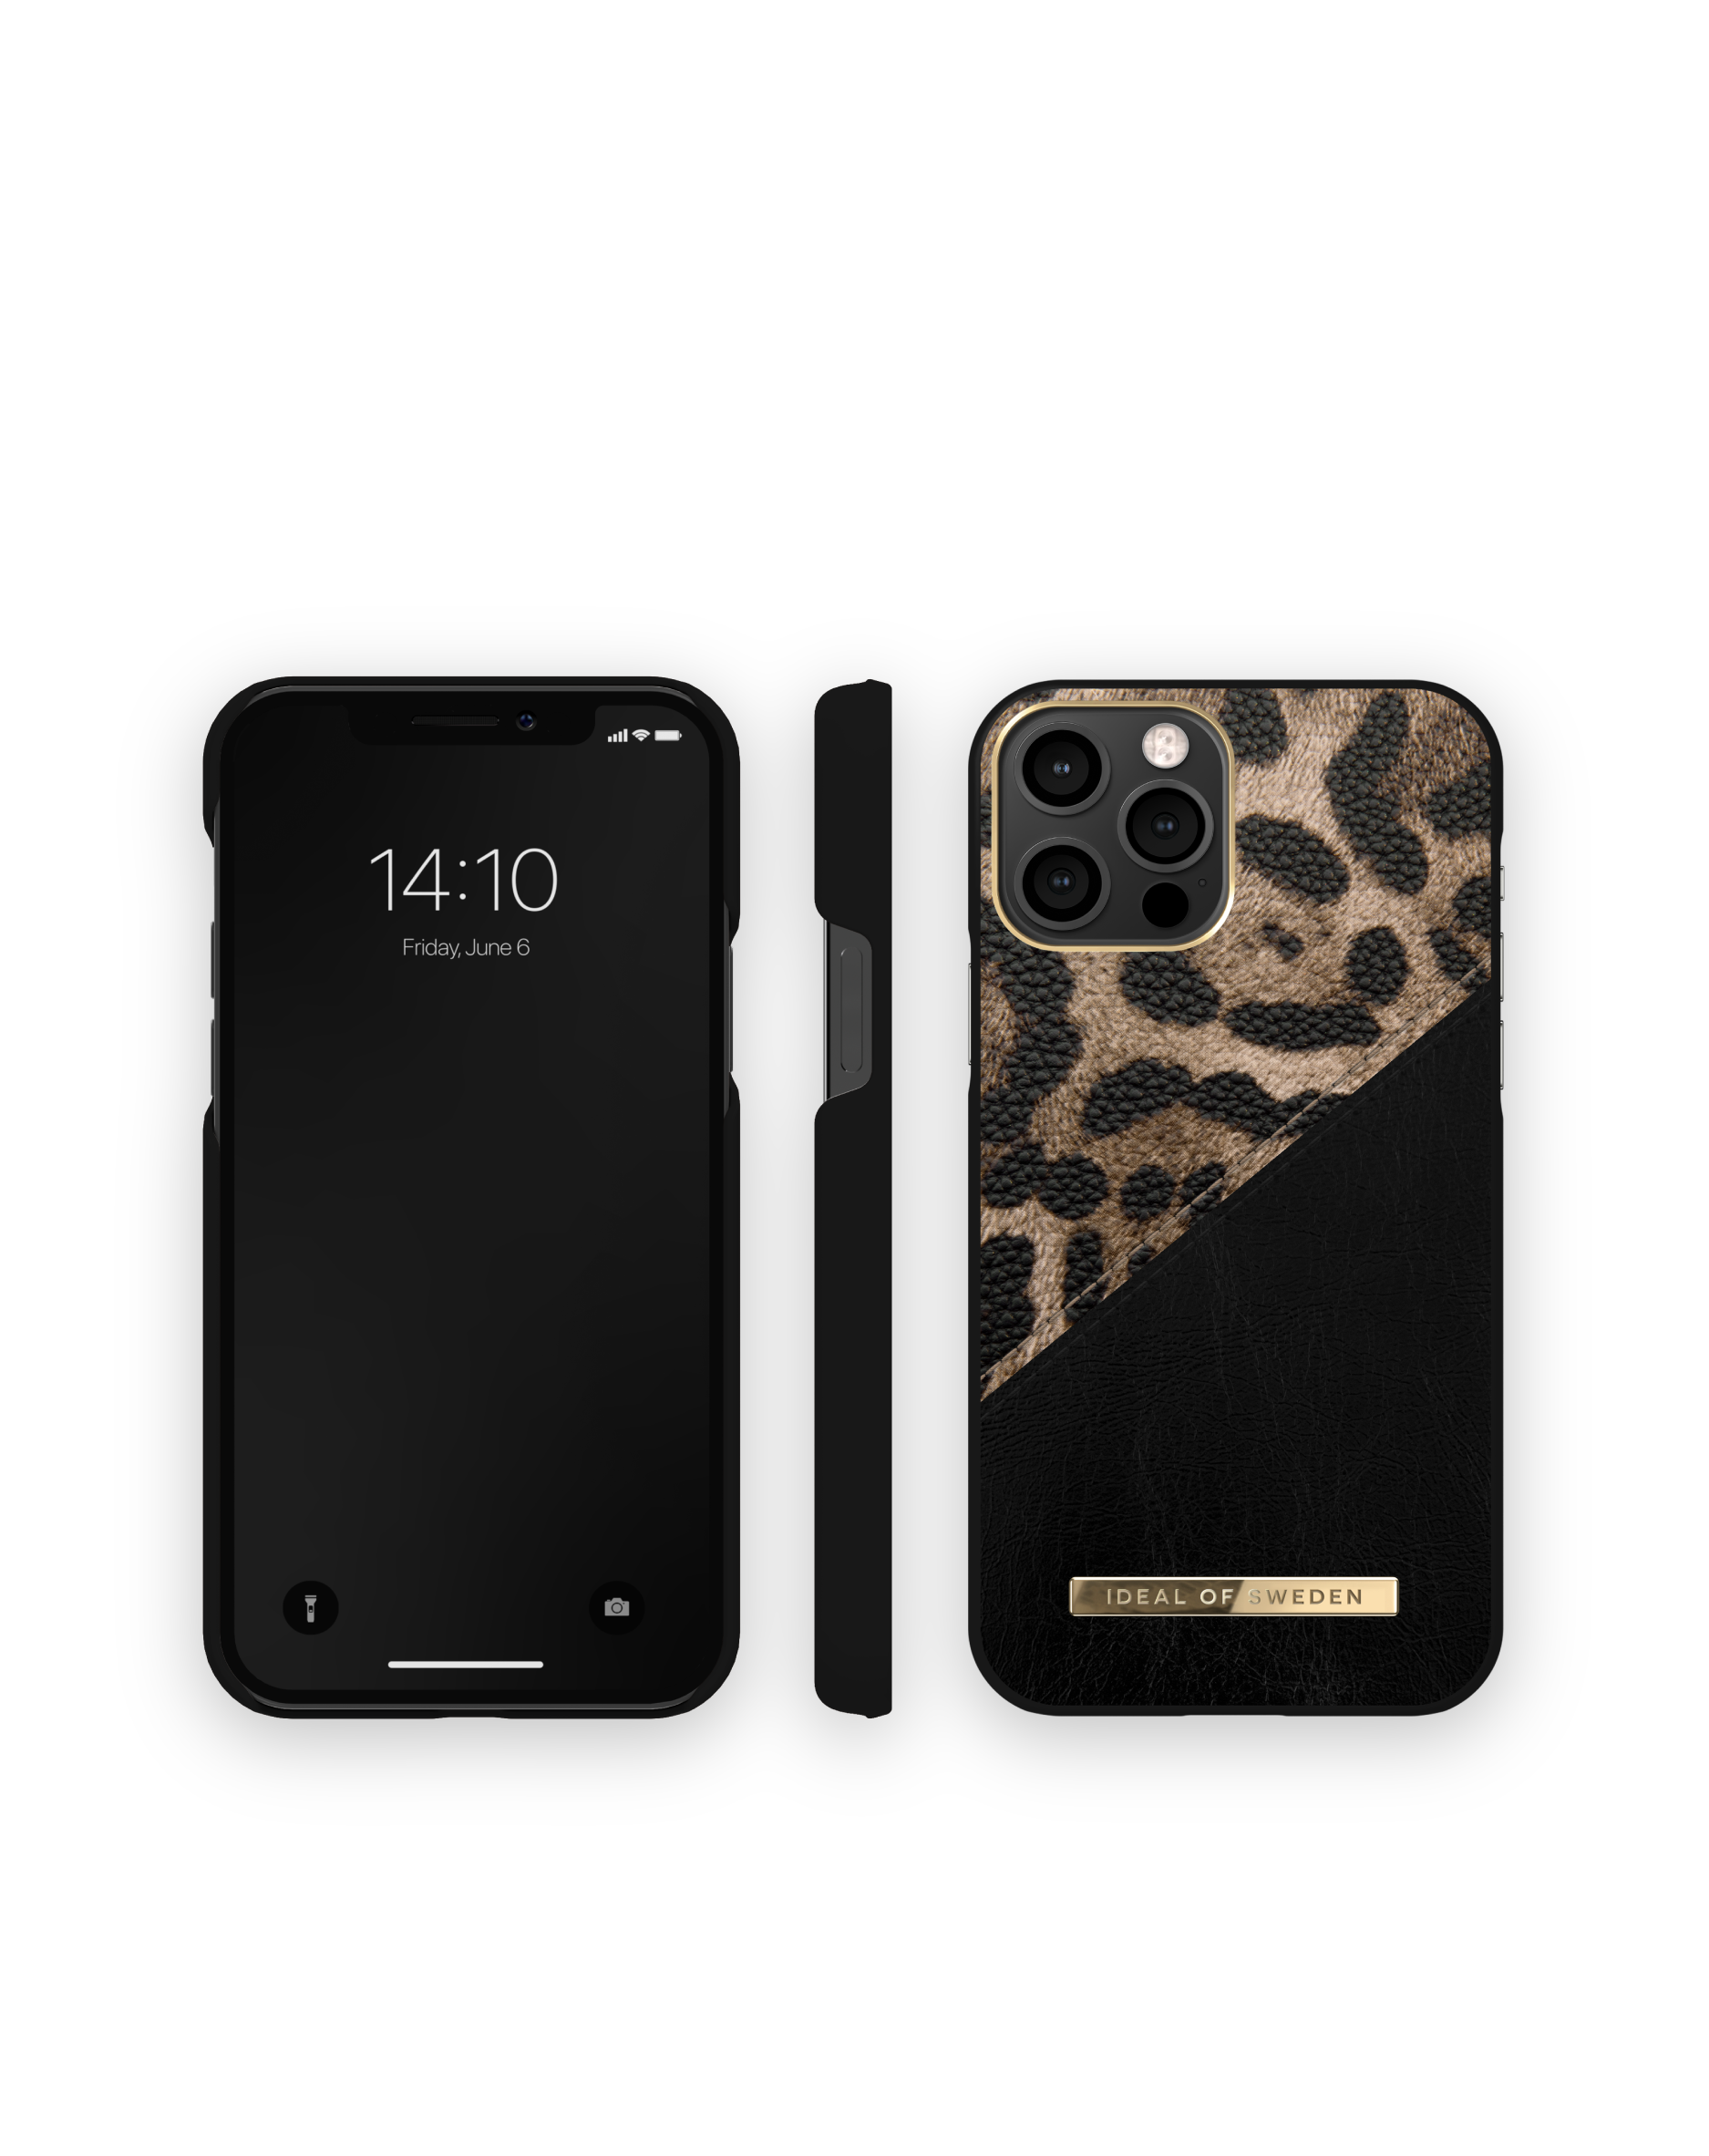 IDEAL OF Backcover, SWEDEN Pro, IDACAW21-I2061-330, Leopard 12/12 iPhone Midnight Apple